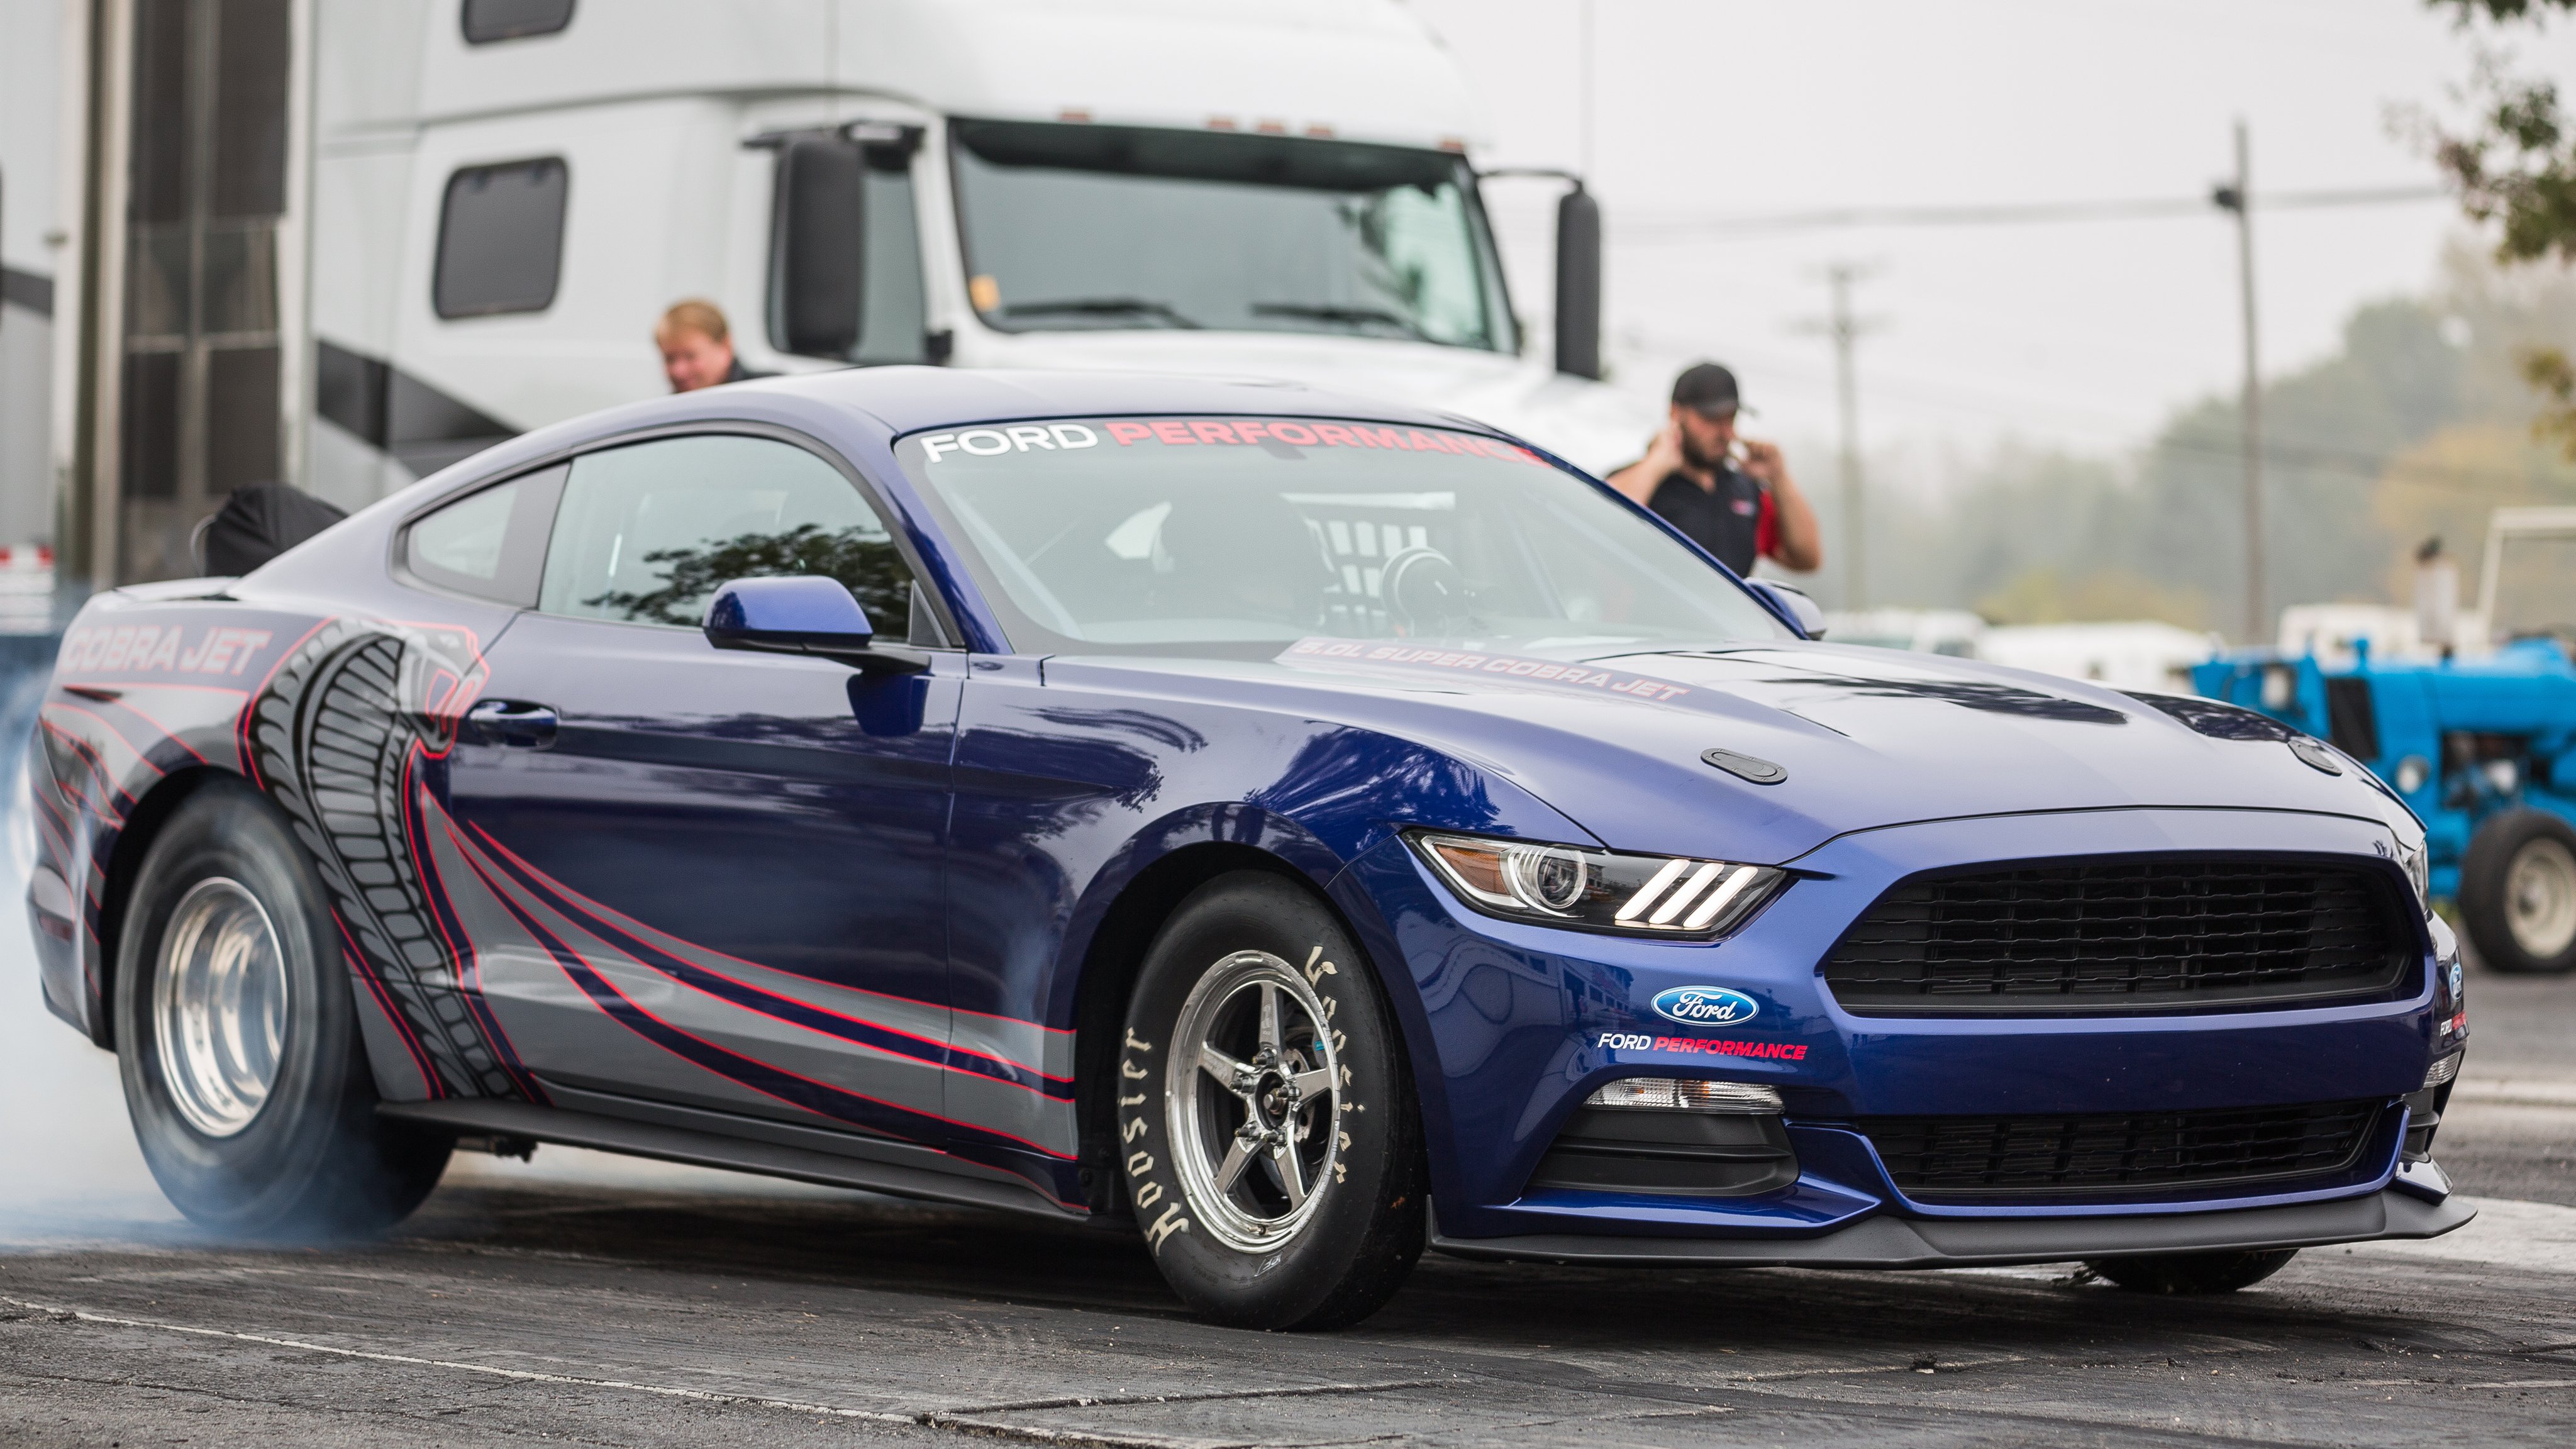 2016, Ford, Mustang, Cobra, Jet, Drag, Racing, Race, Muscle, Hot, Rod, Rods Wallpaper